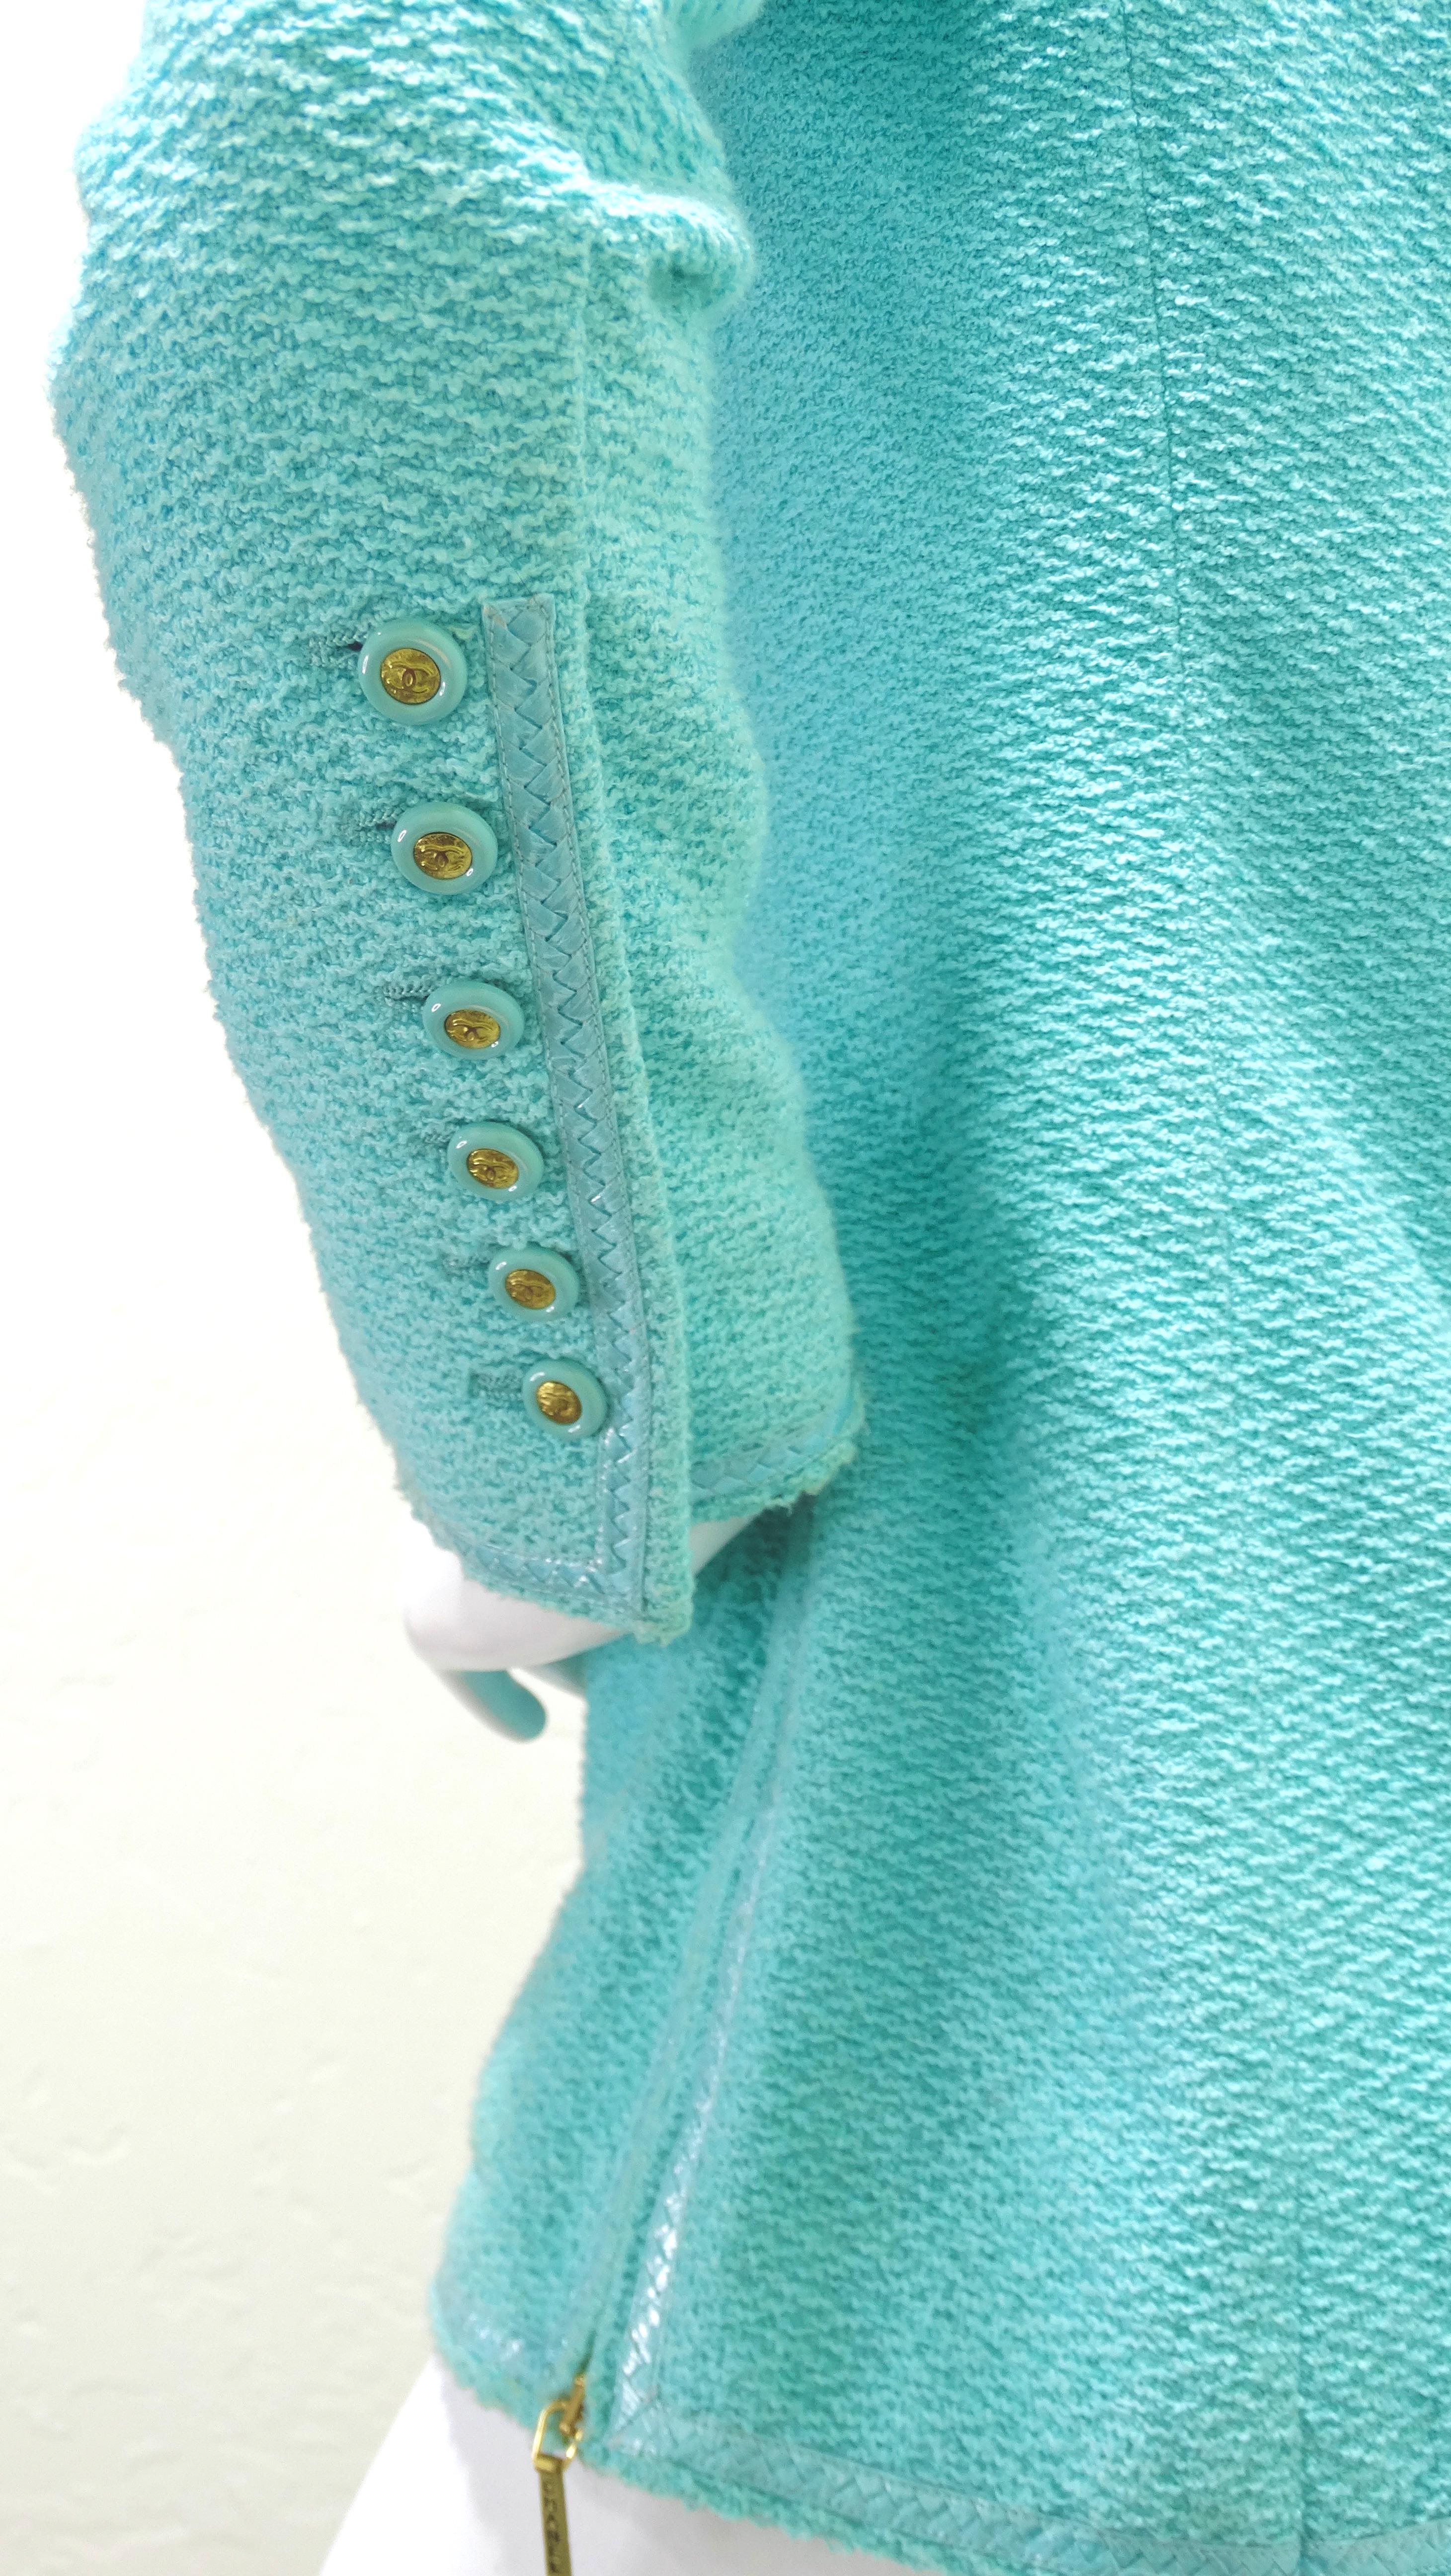 Chanel 1995 Fall Collection Teal Zip-Up Jacket 2